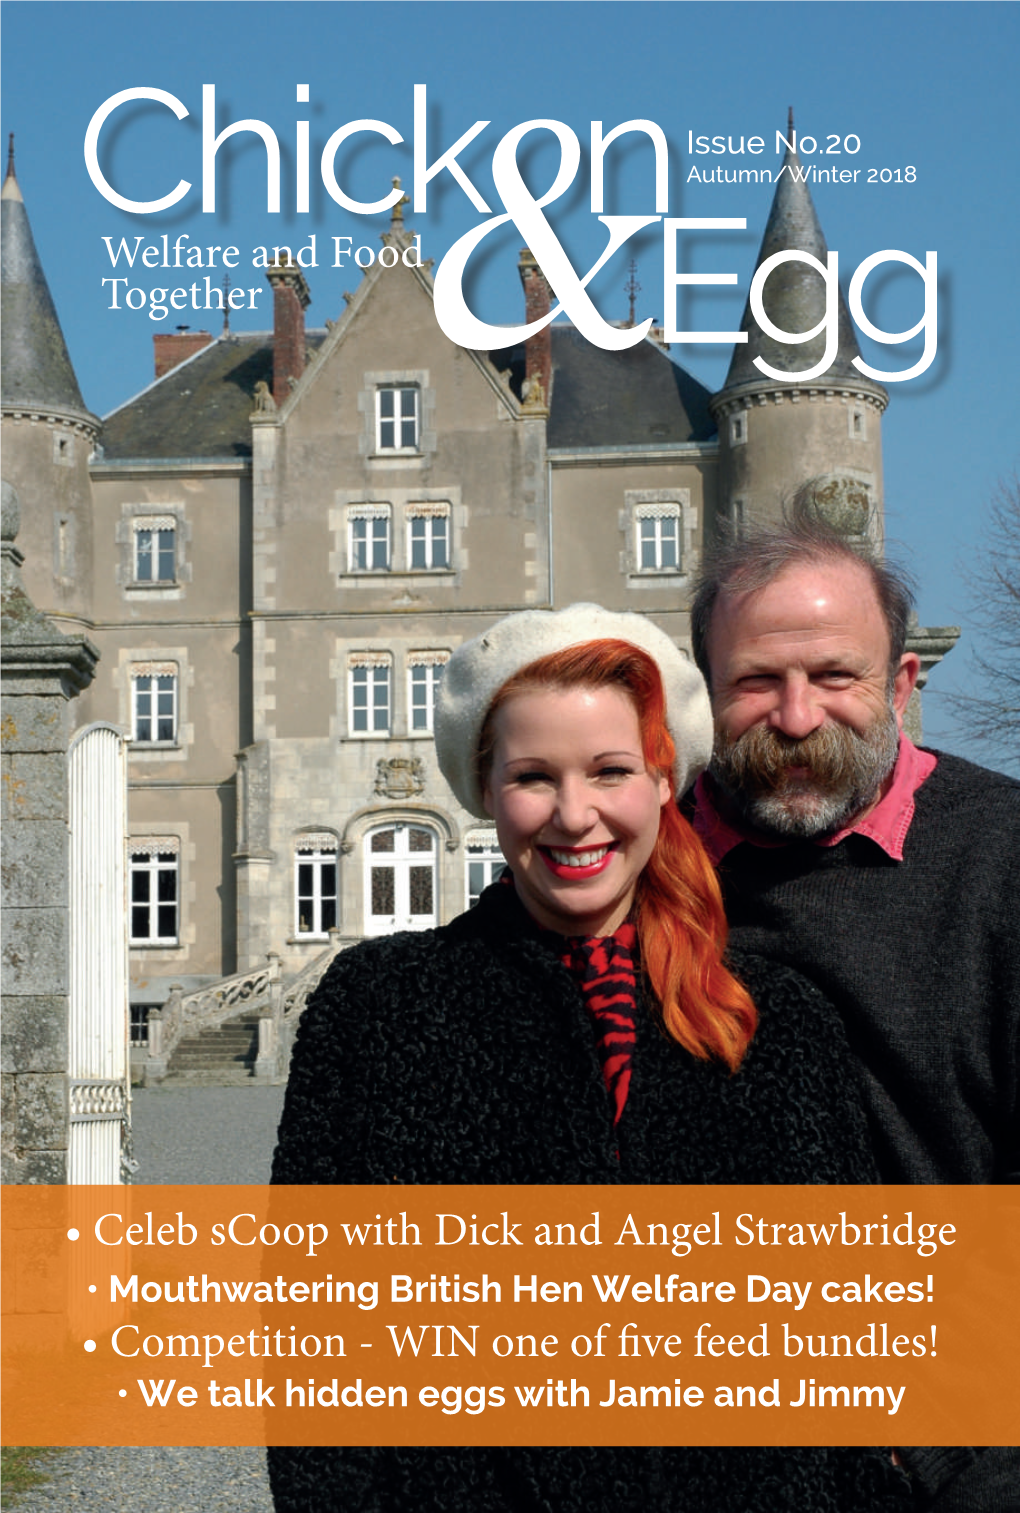 Celeb Scoop with Dick and Angel Strawbridge • Competition